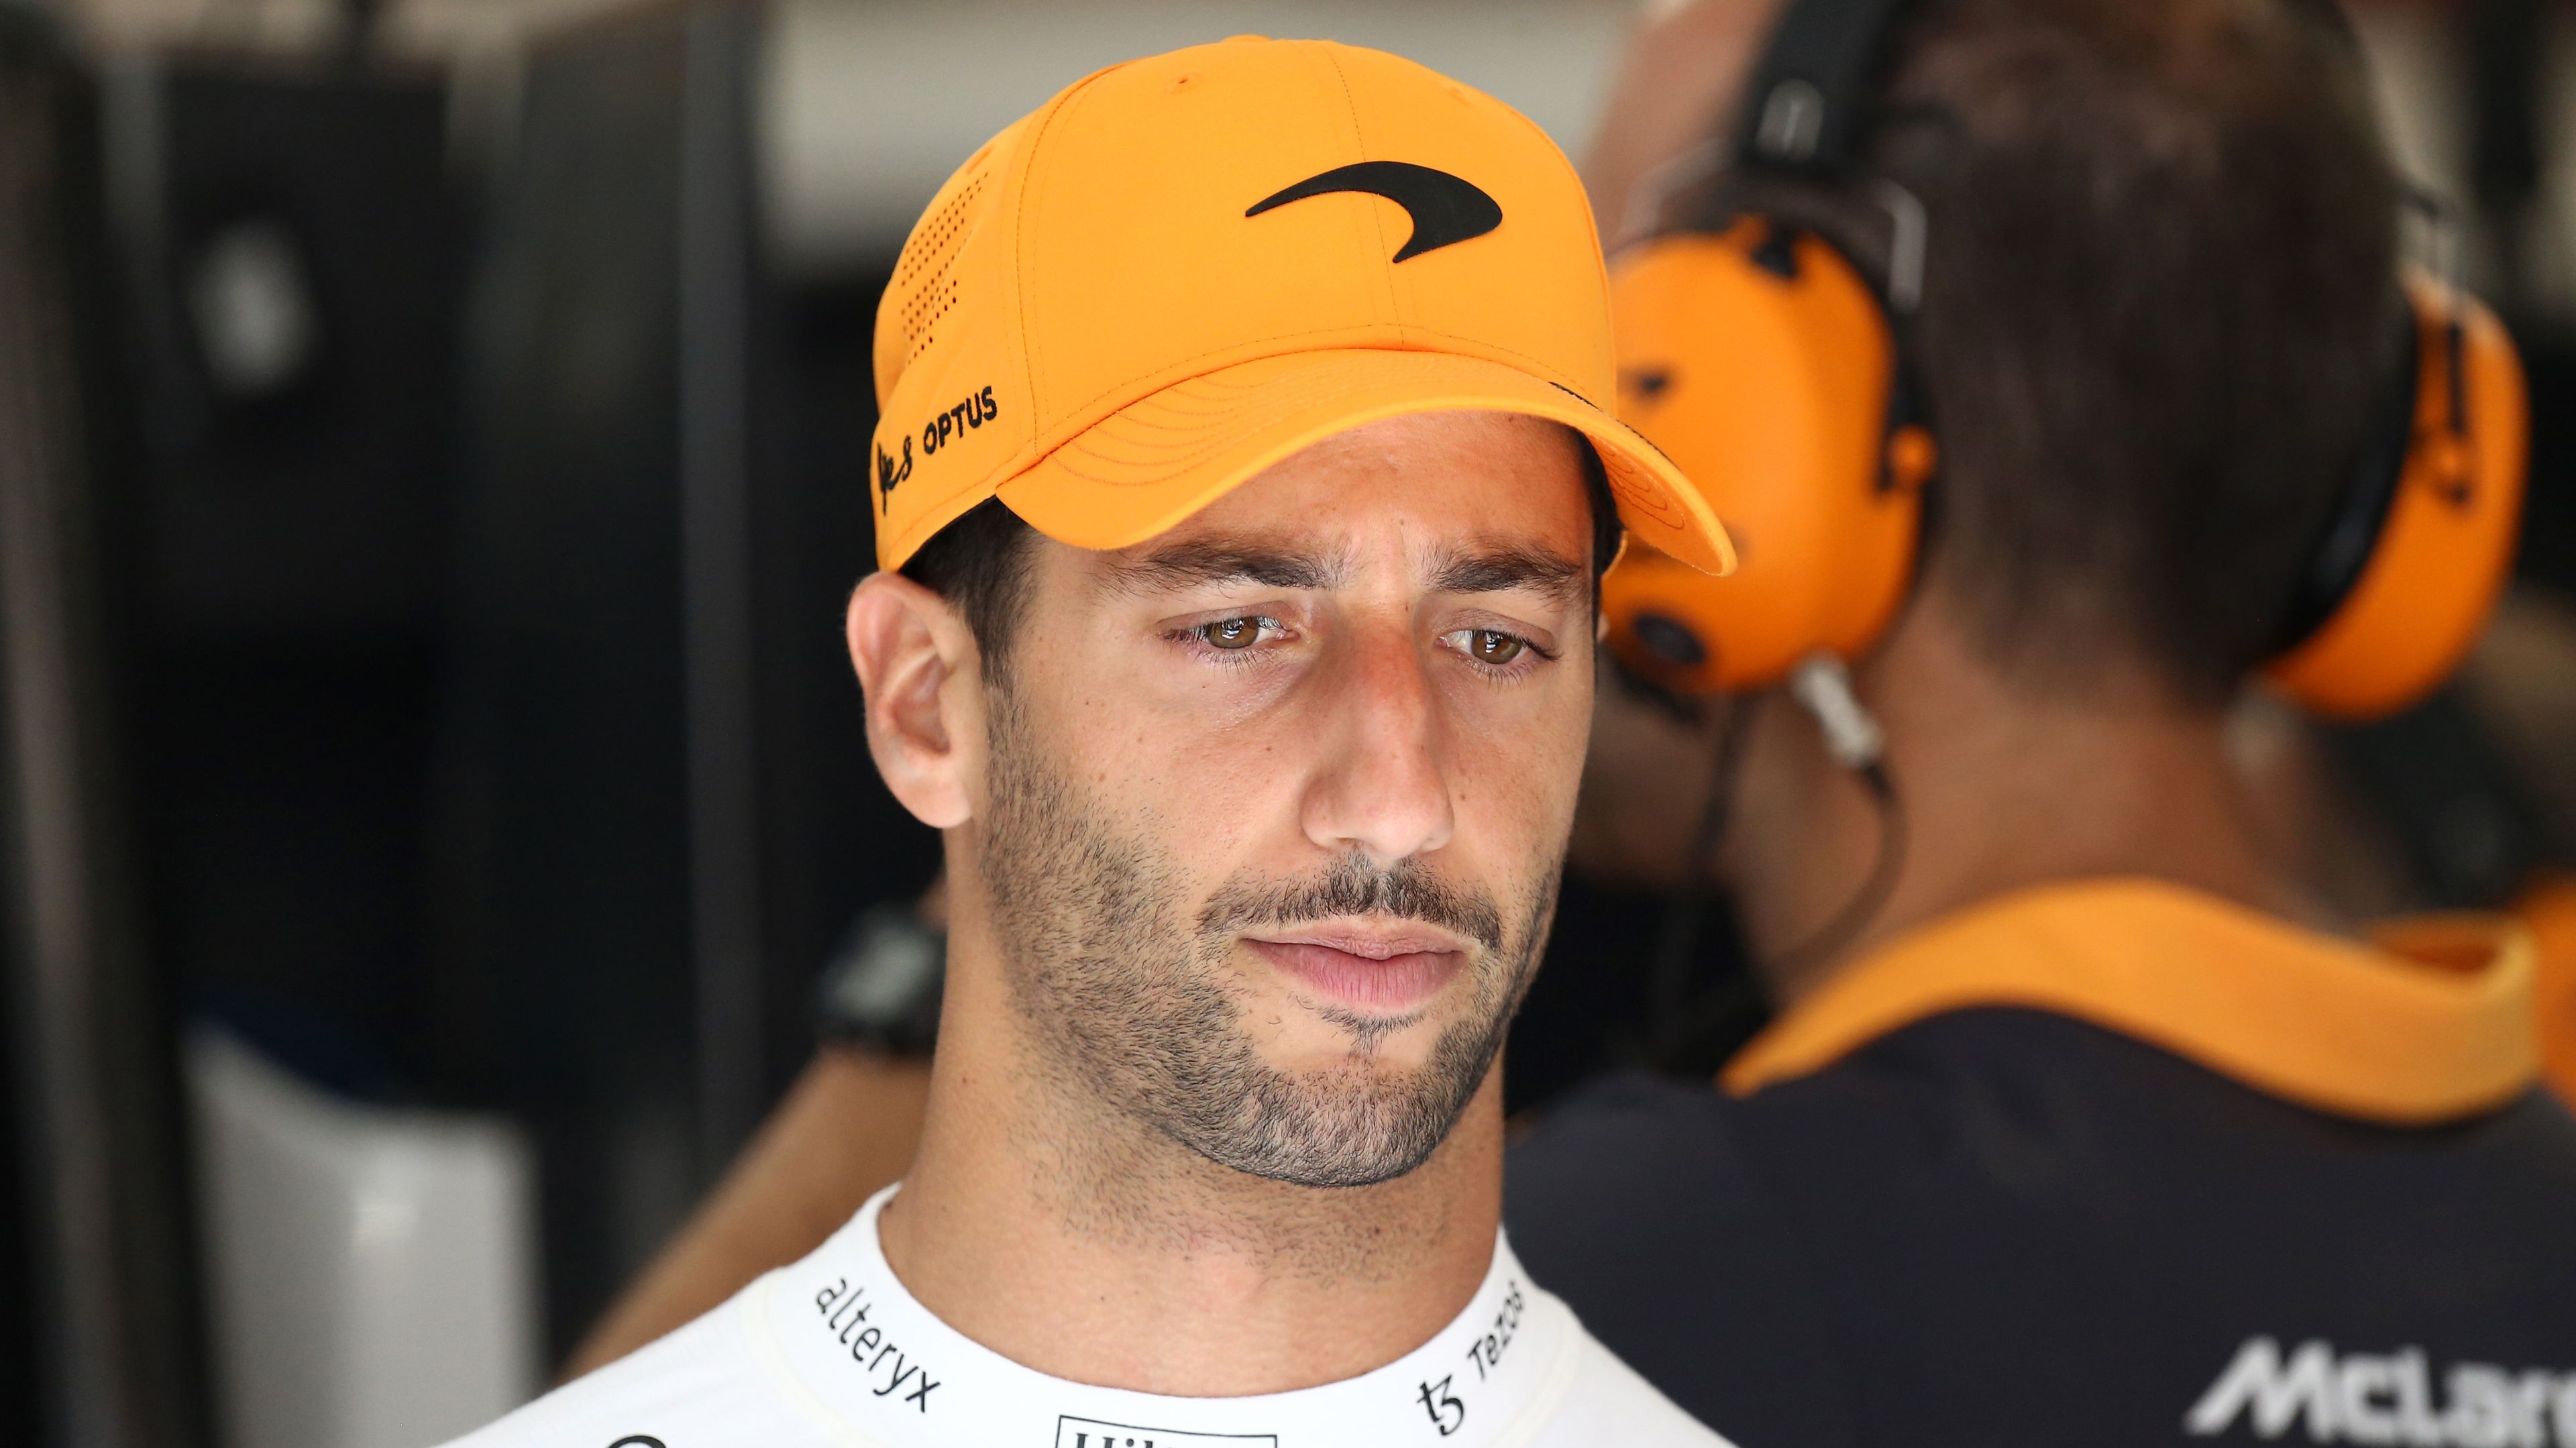 Daniel Ricciardo announces departure from McLaren at the end of 2022 – Wide World of Sports